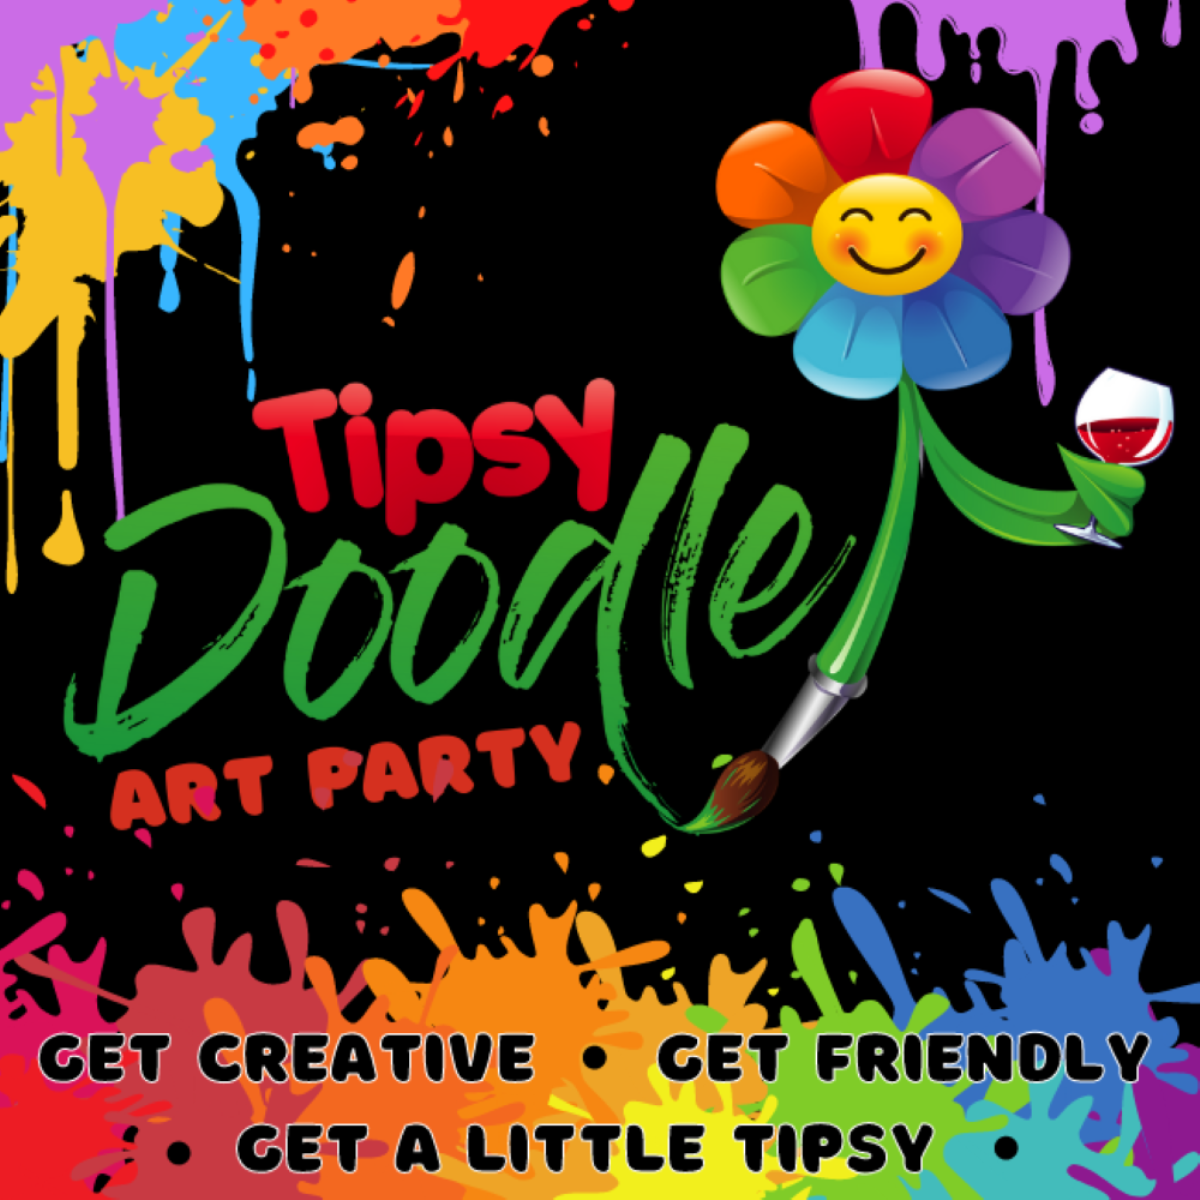 Tipsy Doodle Art Party